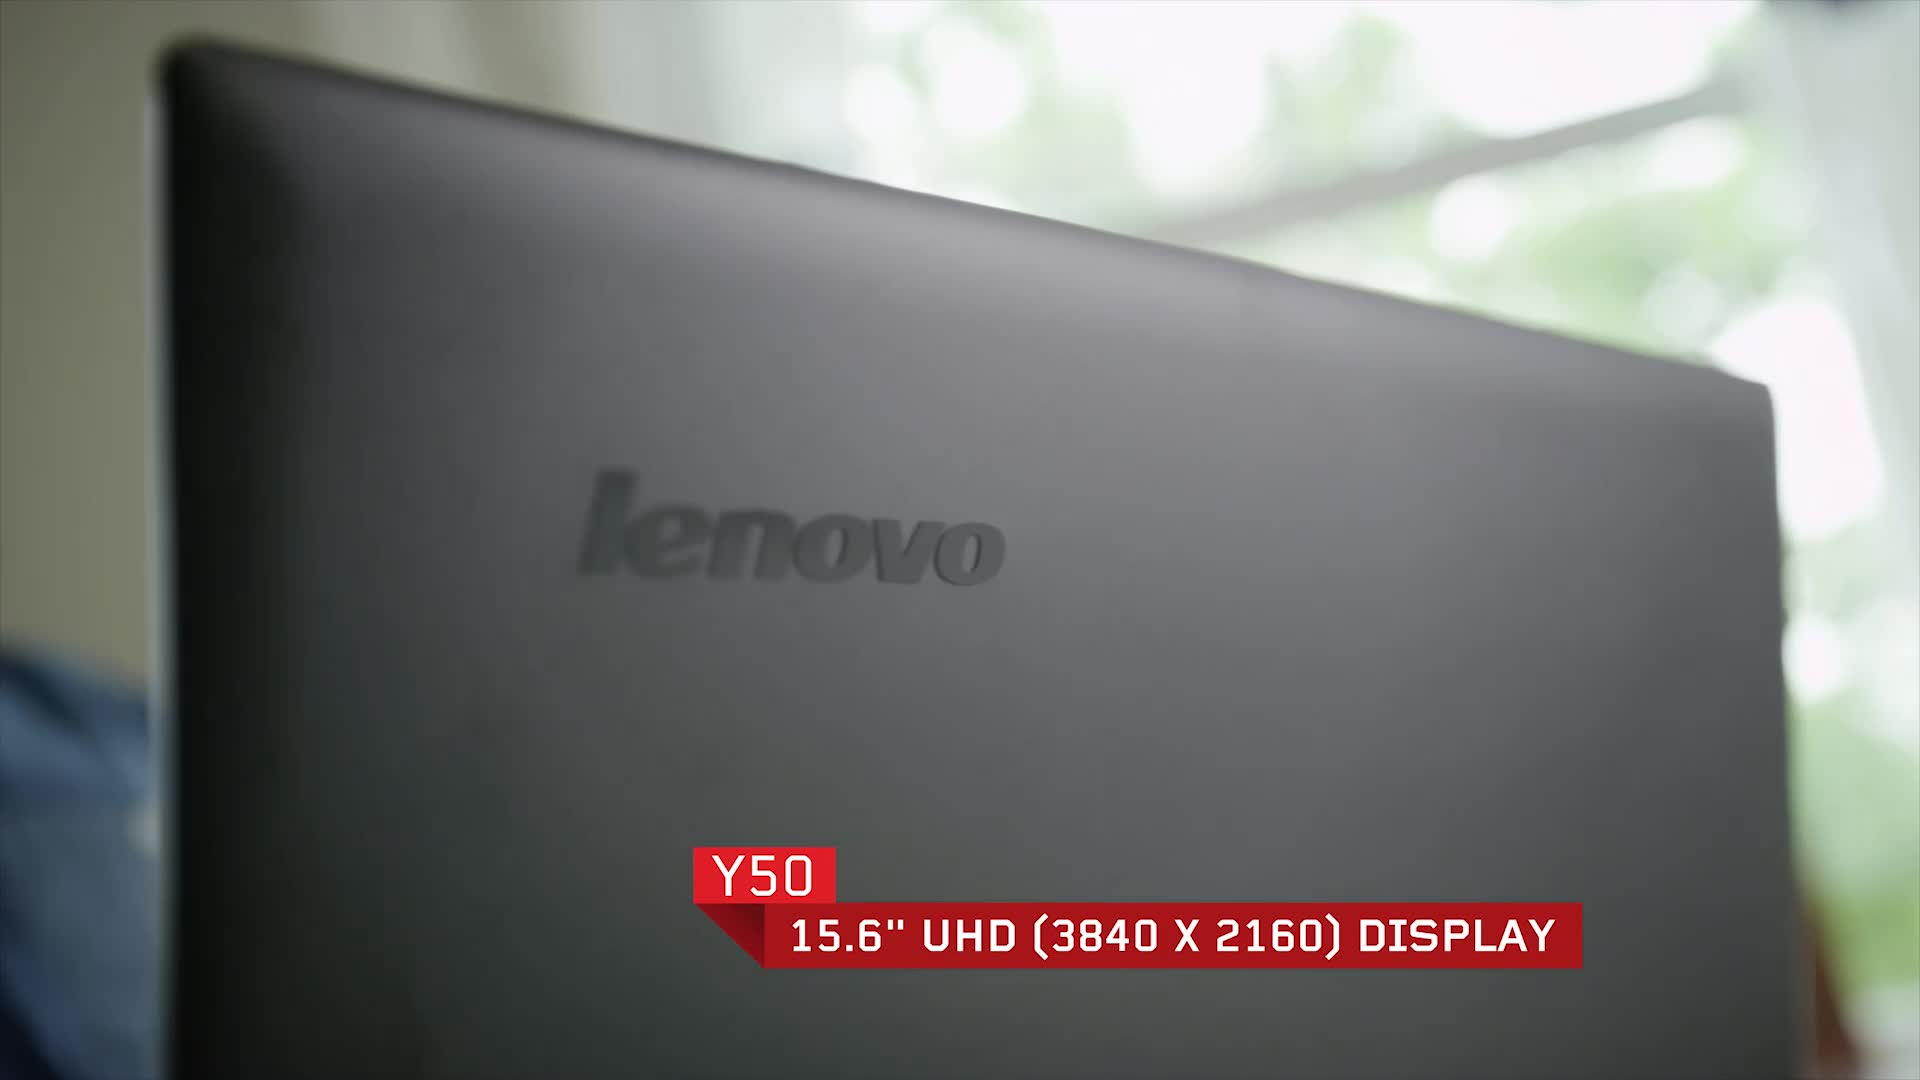 lenovo y50 display driver has stopped responding